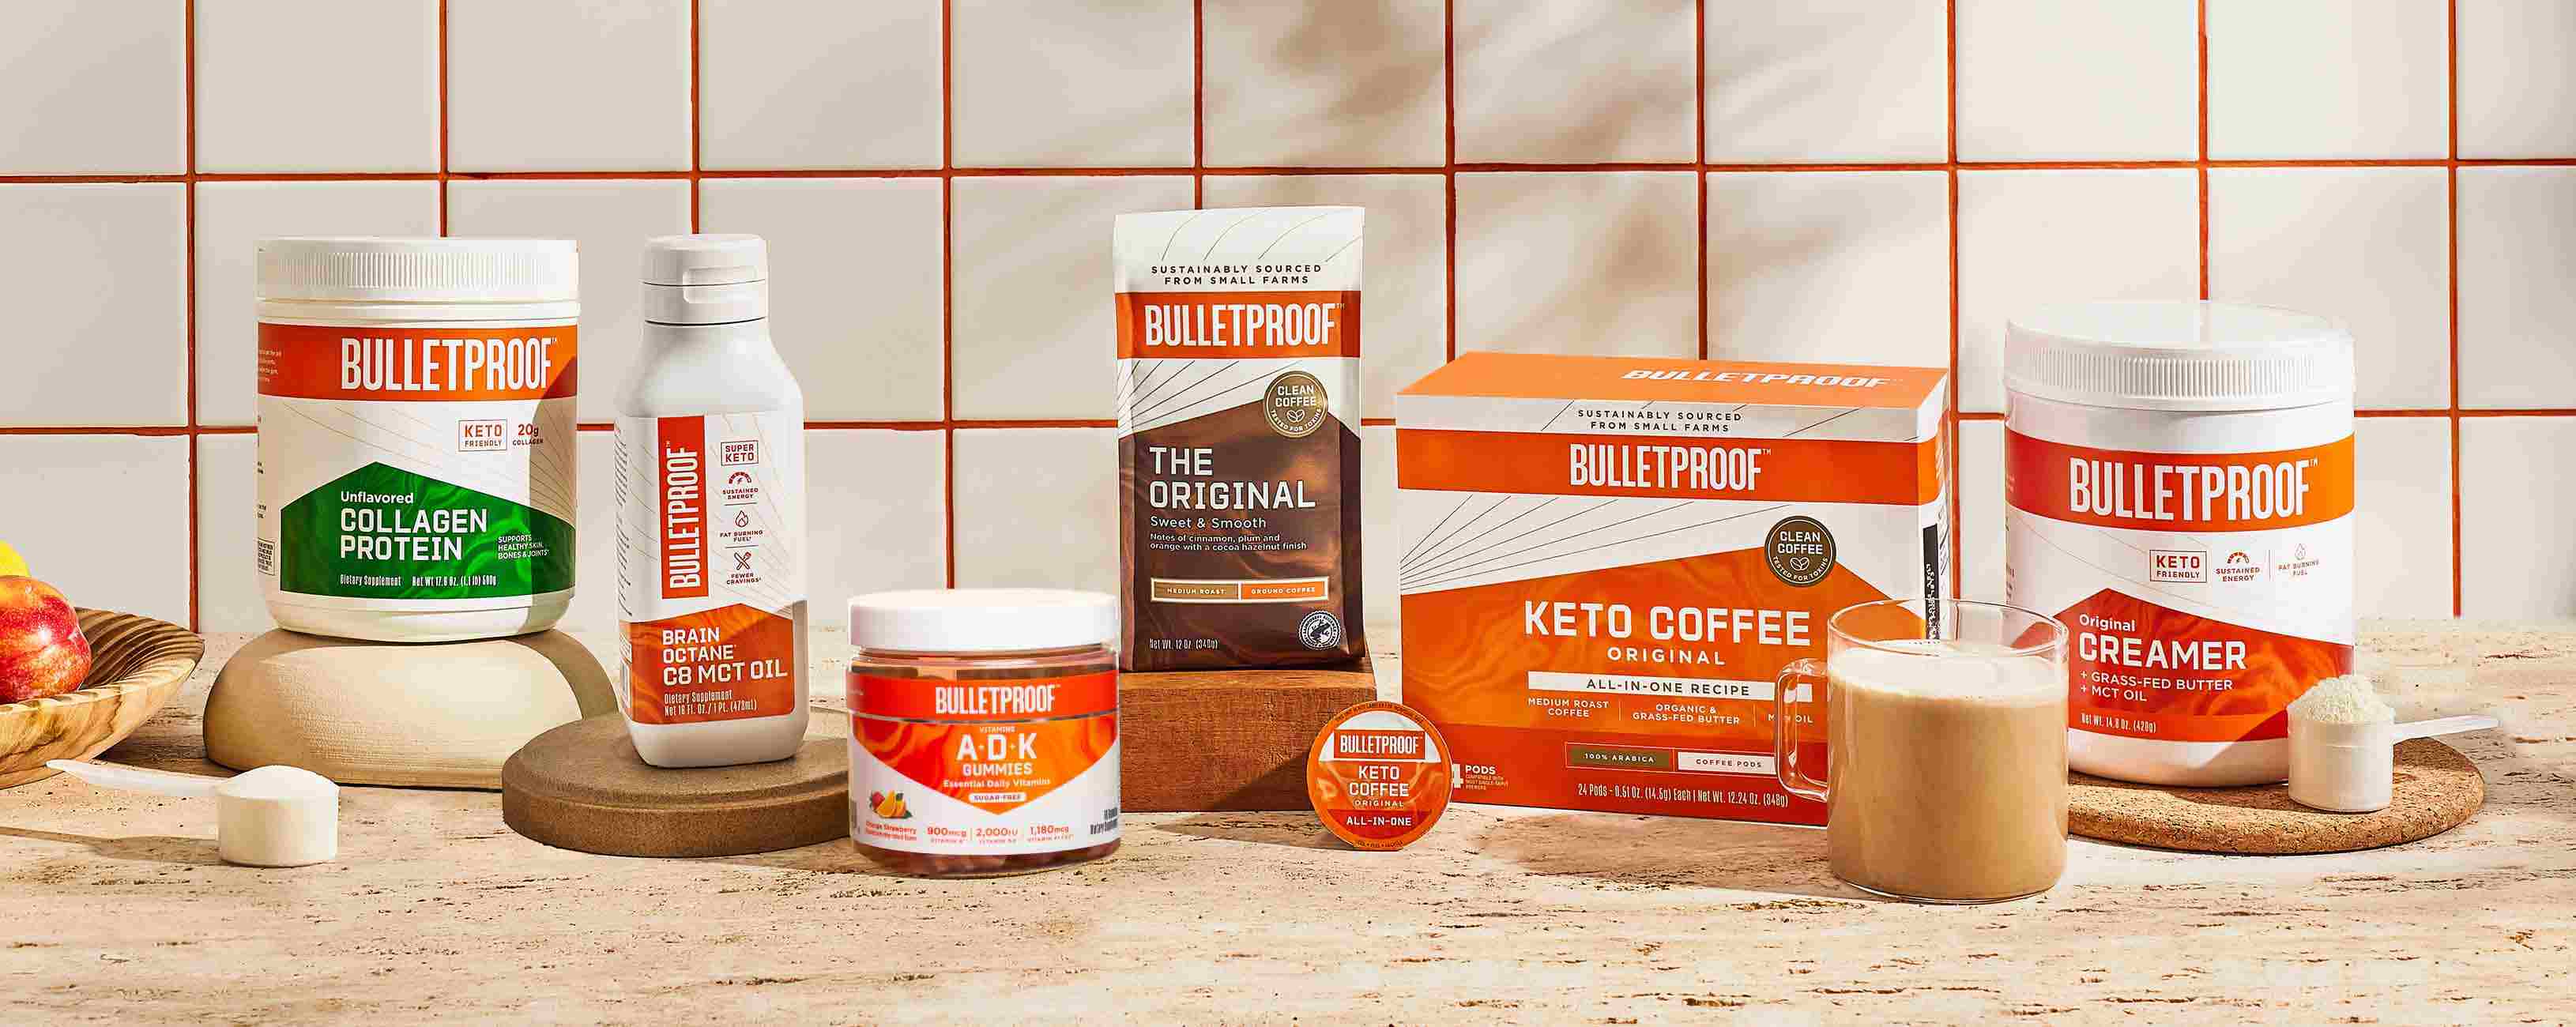 Bulletproof coffee, collagen and MCT oil products showcased on tabletop